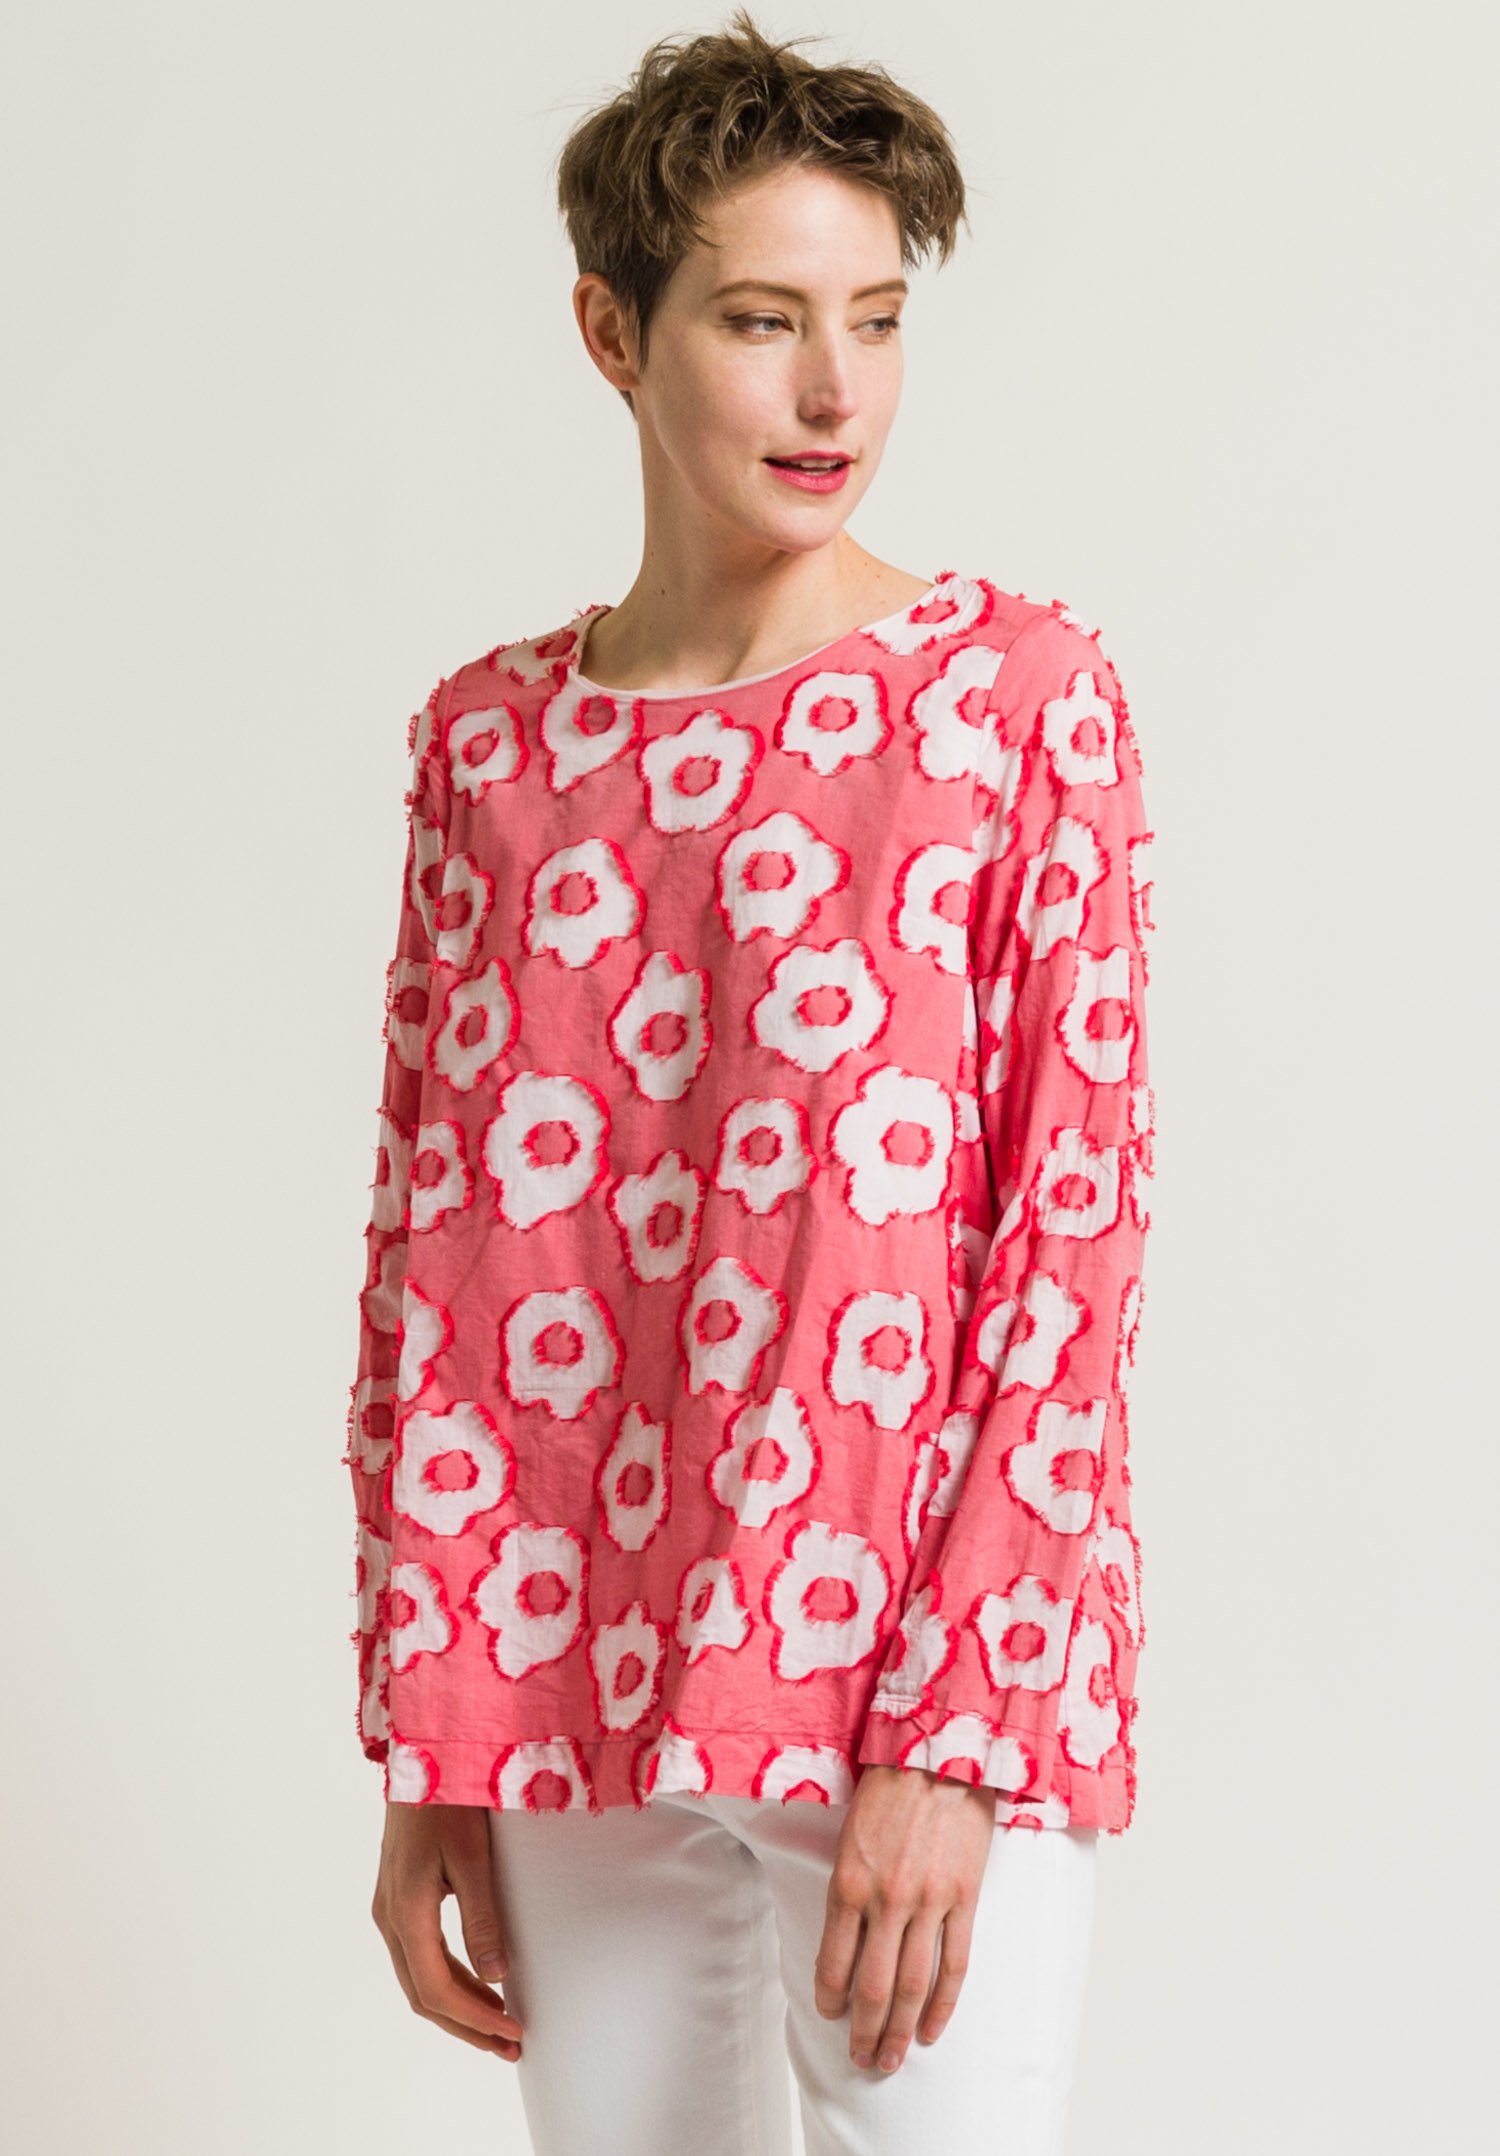 Casey Casey Orchard Top in Red Floral | Santa Fe Dry Goods . Workshop ...